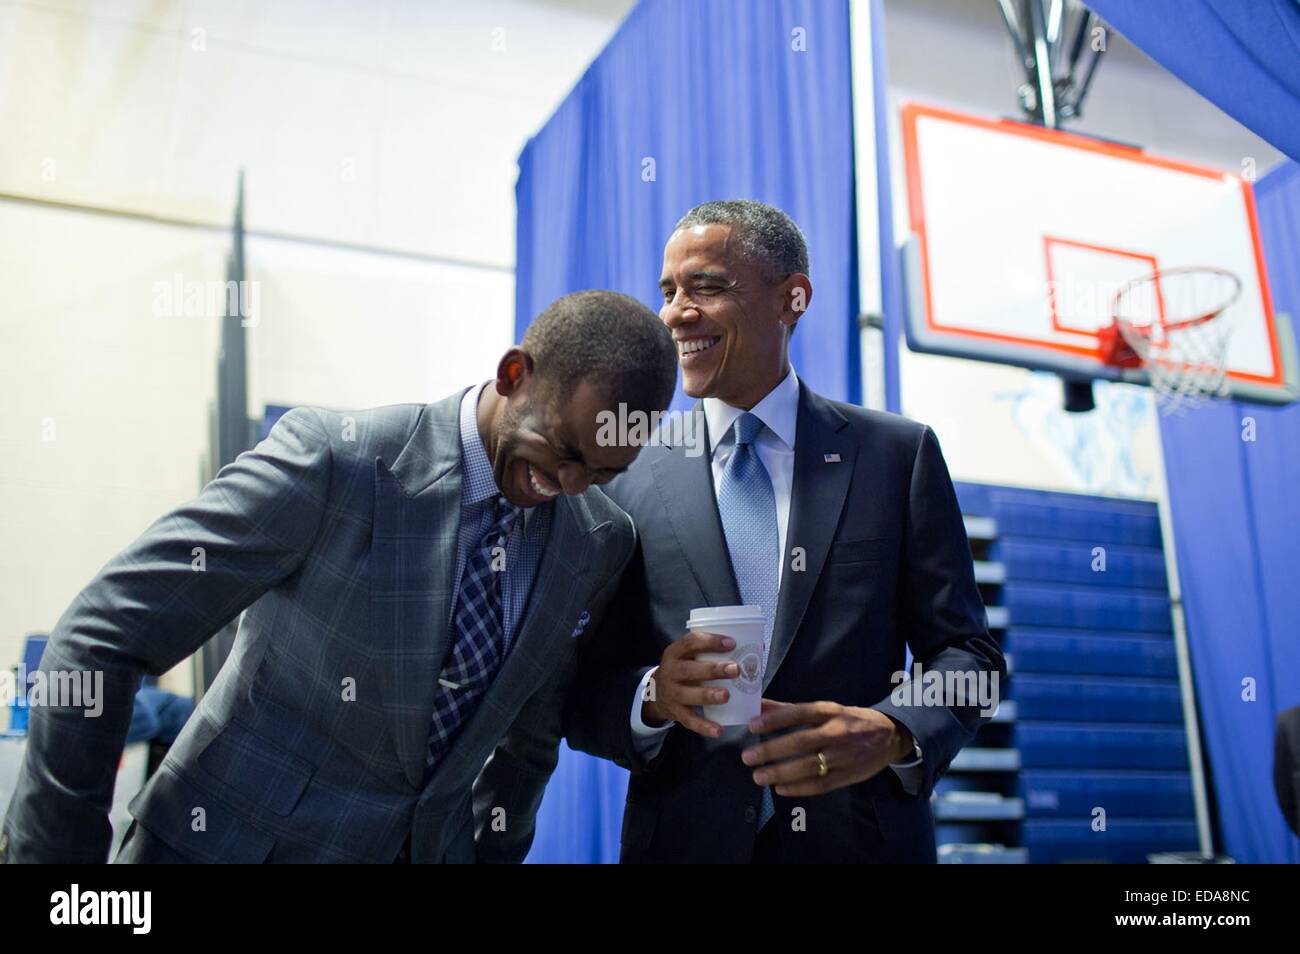 US President Barack Obama shares a laugh backstage with Los Angeles Clippers basketball player Chris Paul, who was about to introduce the President at a My Brother's Keeper initiative town hall July 21, 2014 in Washington, DC. Stock Photo